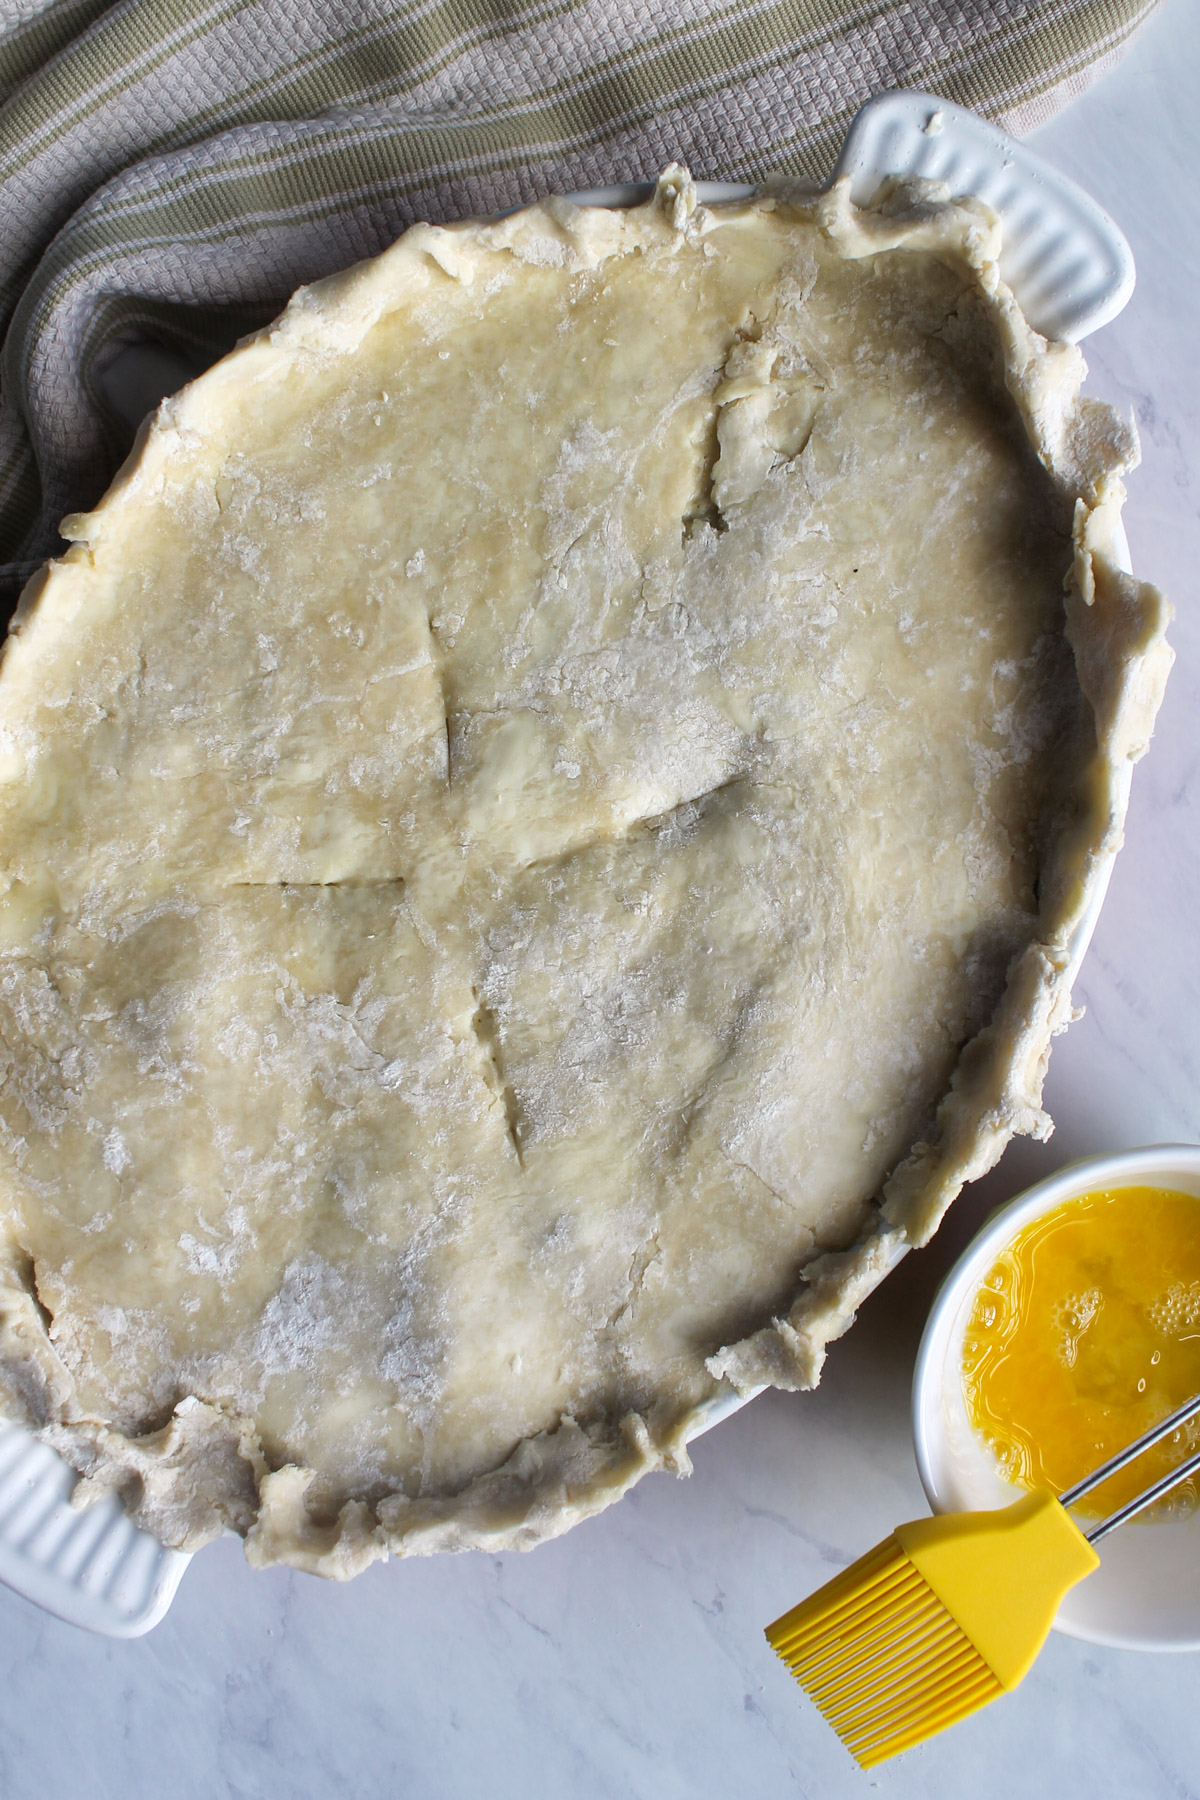 Pie crust on the baking dish of pot pie filling with a bowl of egg wash next to it.